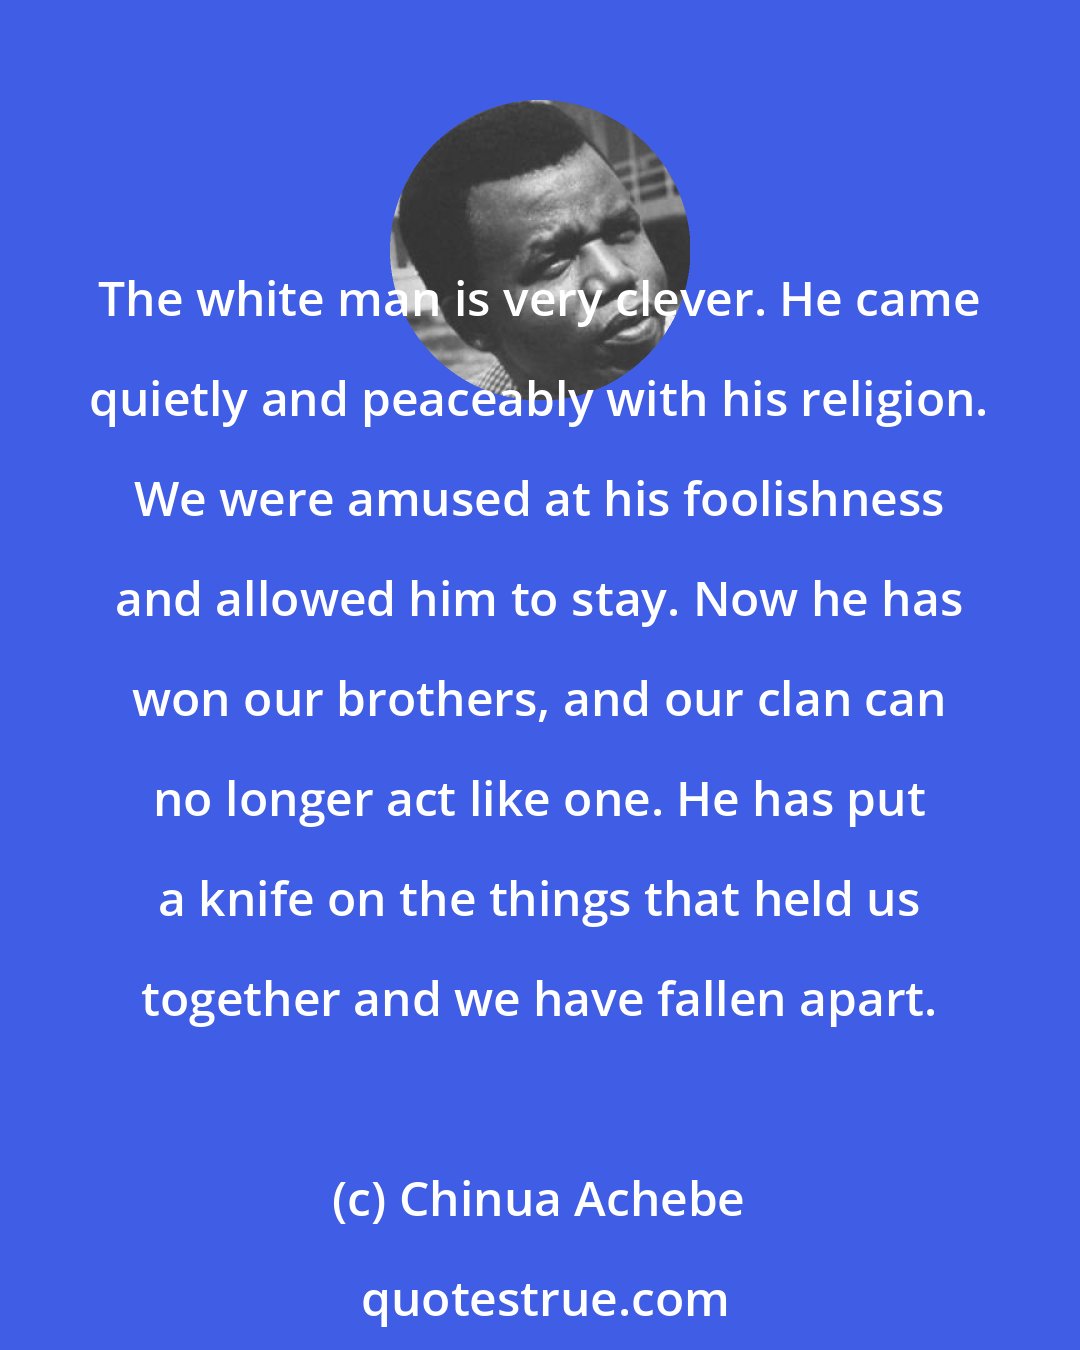 Chinua Achebe: The white man is very clever. He came quietly and peaceably with his religion. We were amused at his foolishness and allowed him to stay. Now he has won our brothers, and our clan can no longer act like one. He has put a knife on the things that held us together and we have fallen apart.